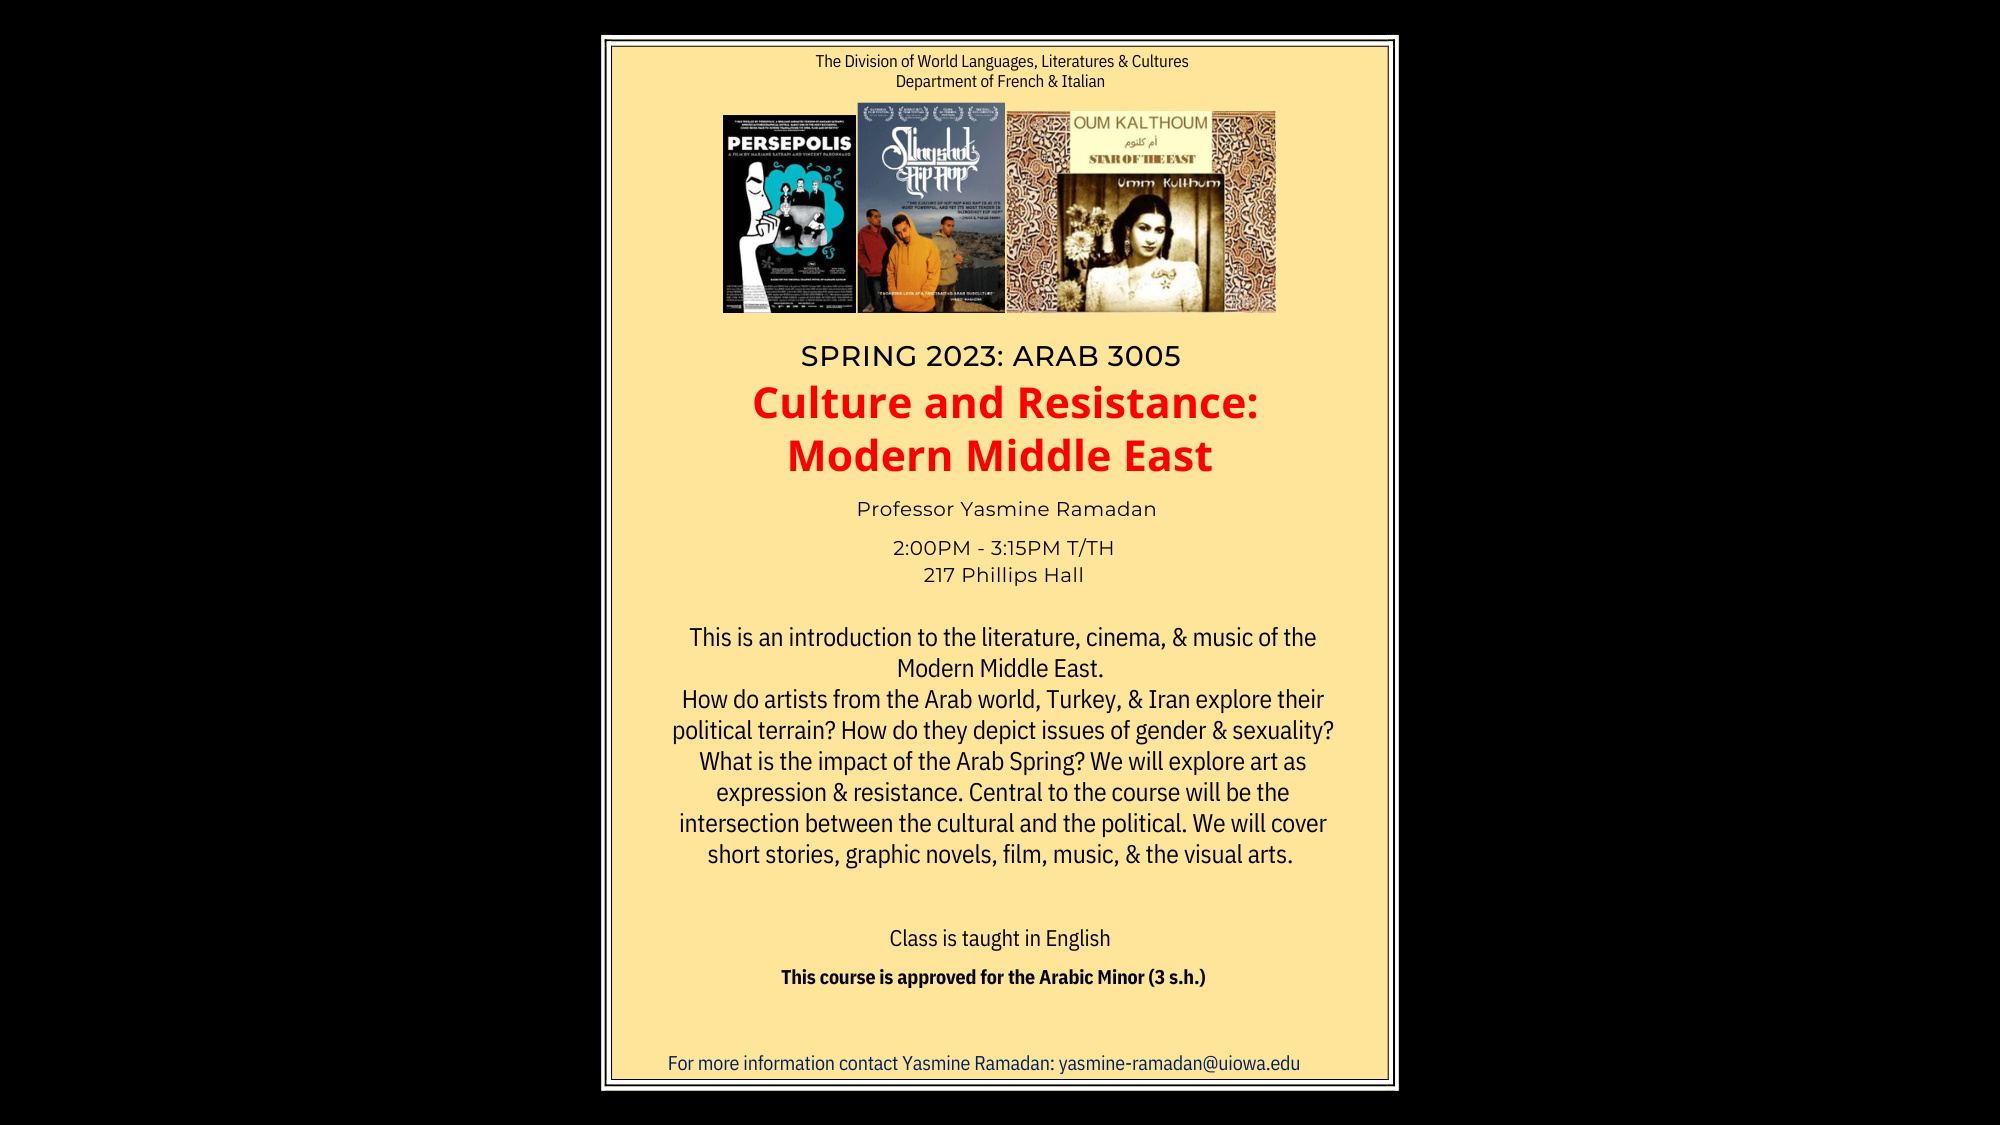 flyer for a course called "Culture and Resistance: Modern Middle East;" includes pictures of entertainment media from the region and a description of the course